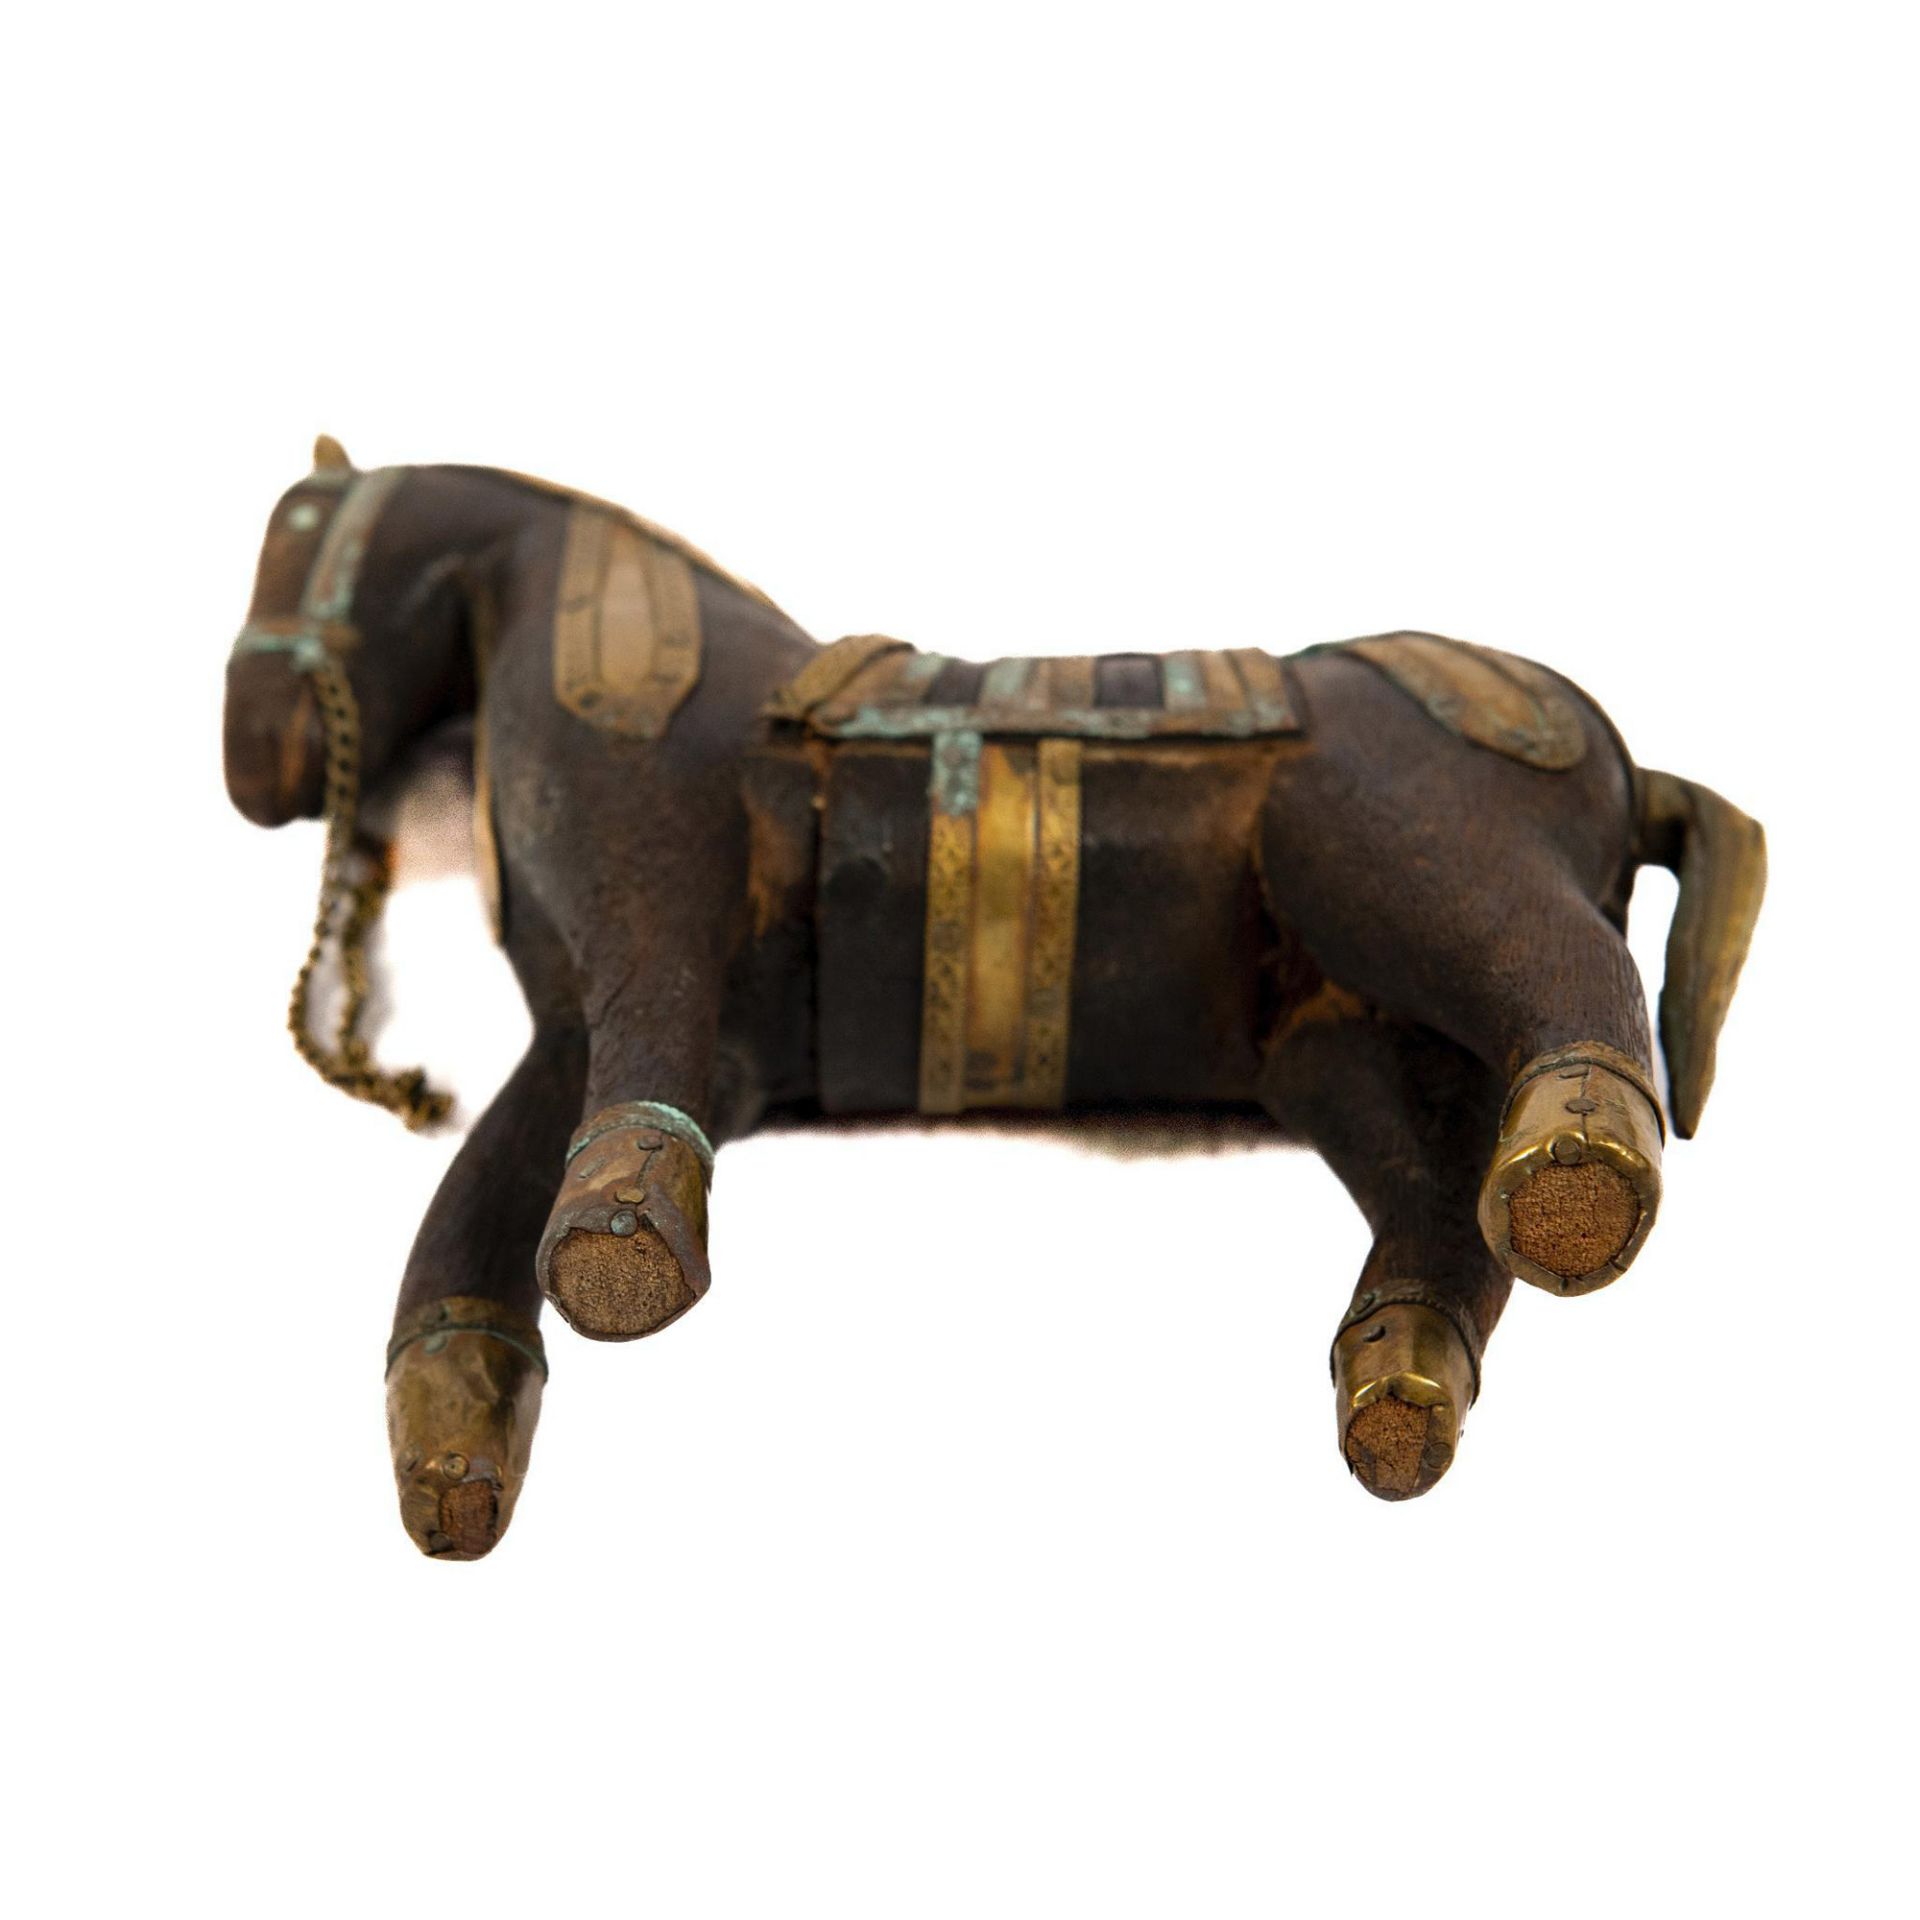 Rajasthani Wooden War Horse with Brass Accents - Image 4 of 4